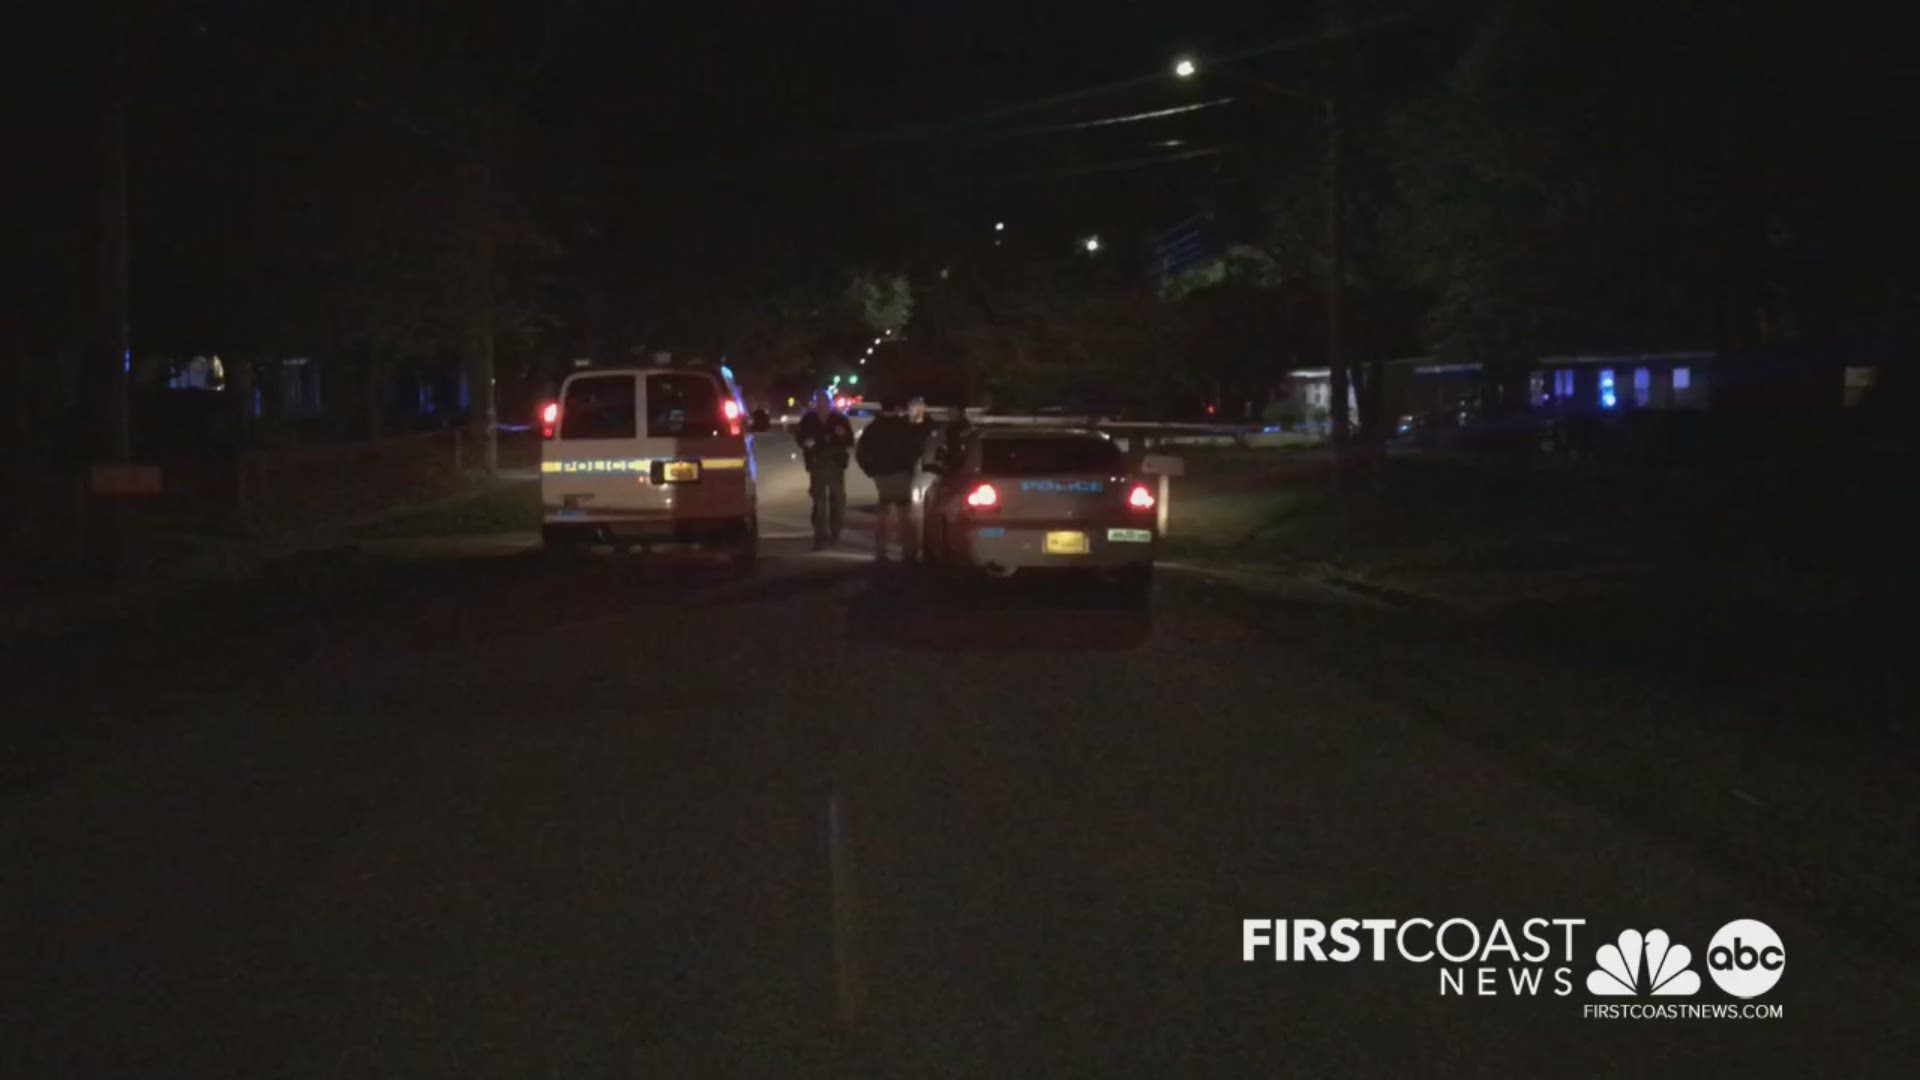 Police are on the scene of a reported shooting in Jacksonville's Woodstock neighborhood.